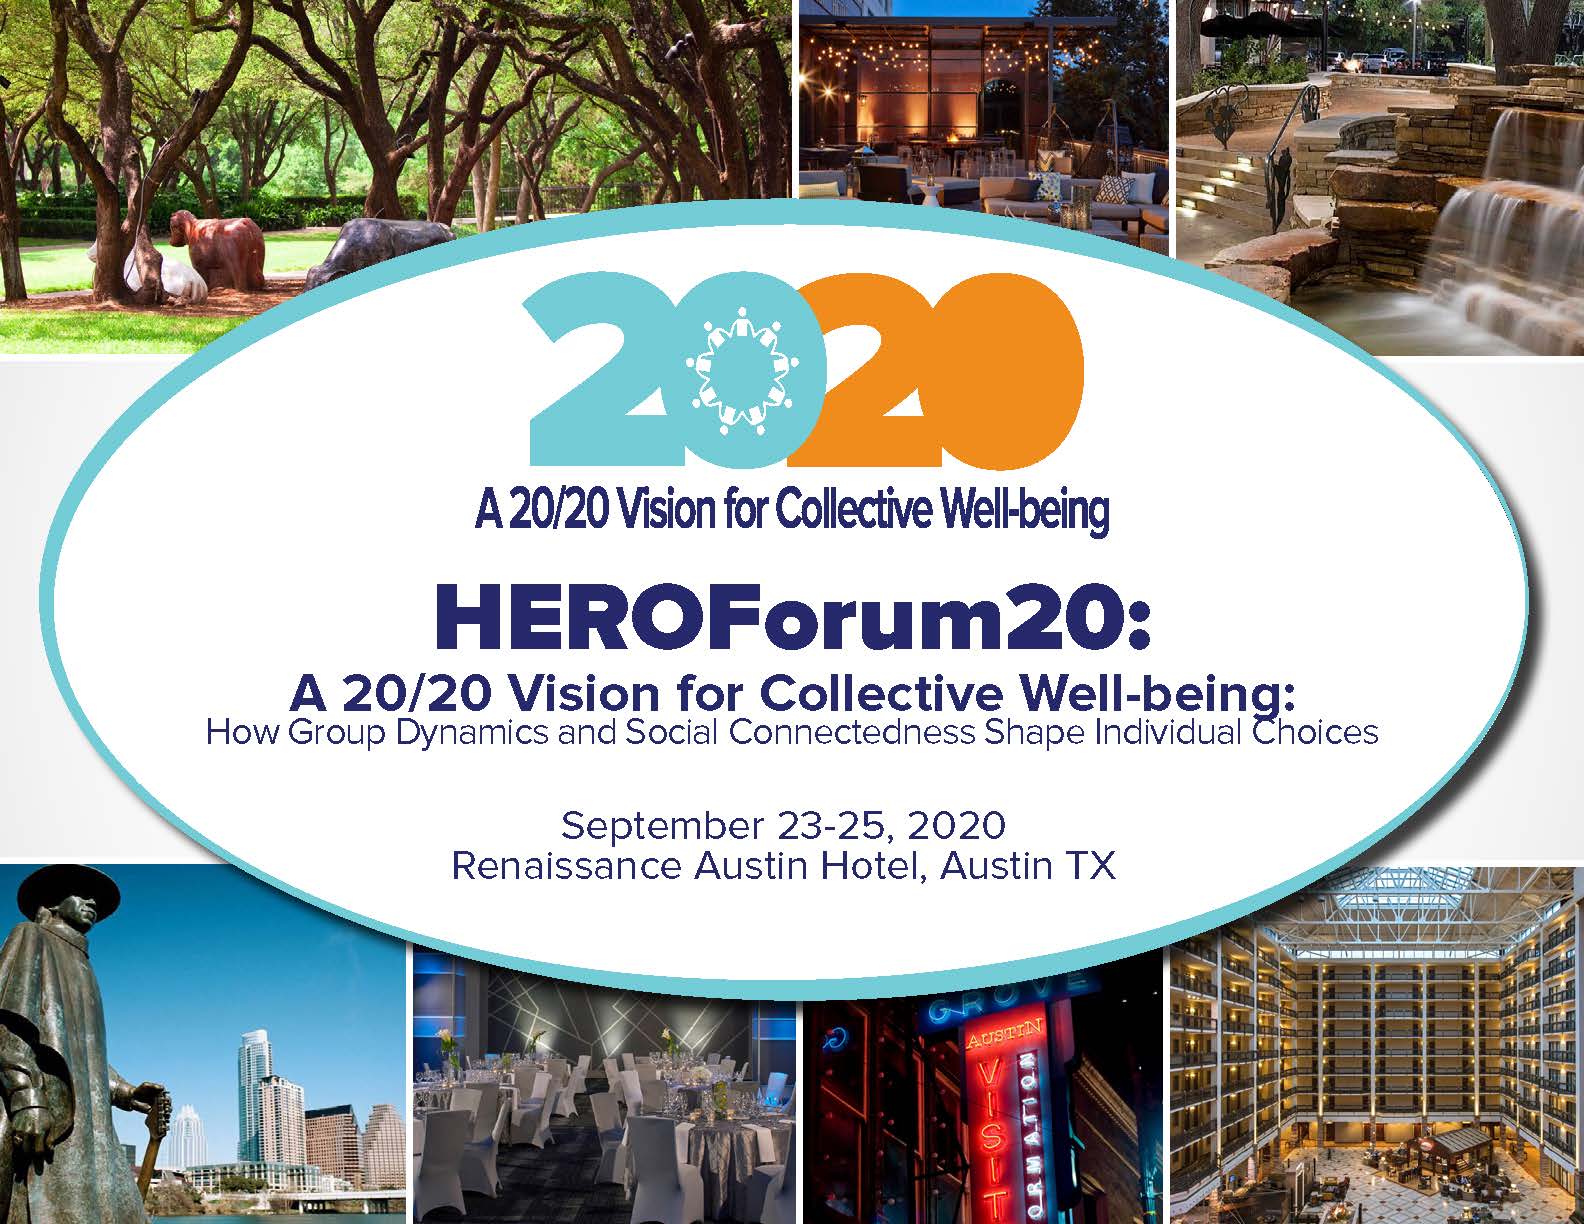 HEROForum20: A 20/20 Vision for Collective Well-being